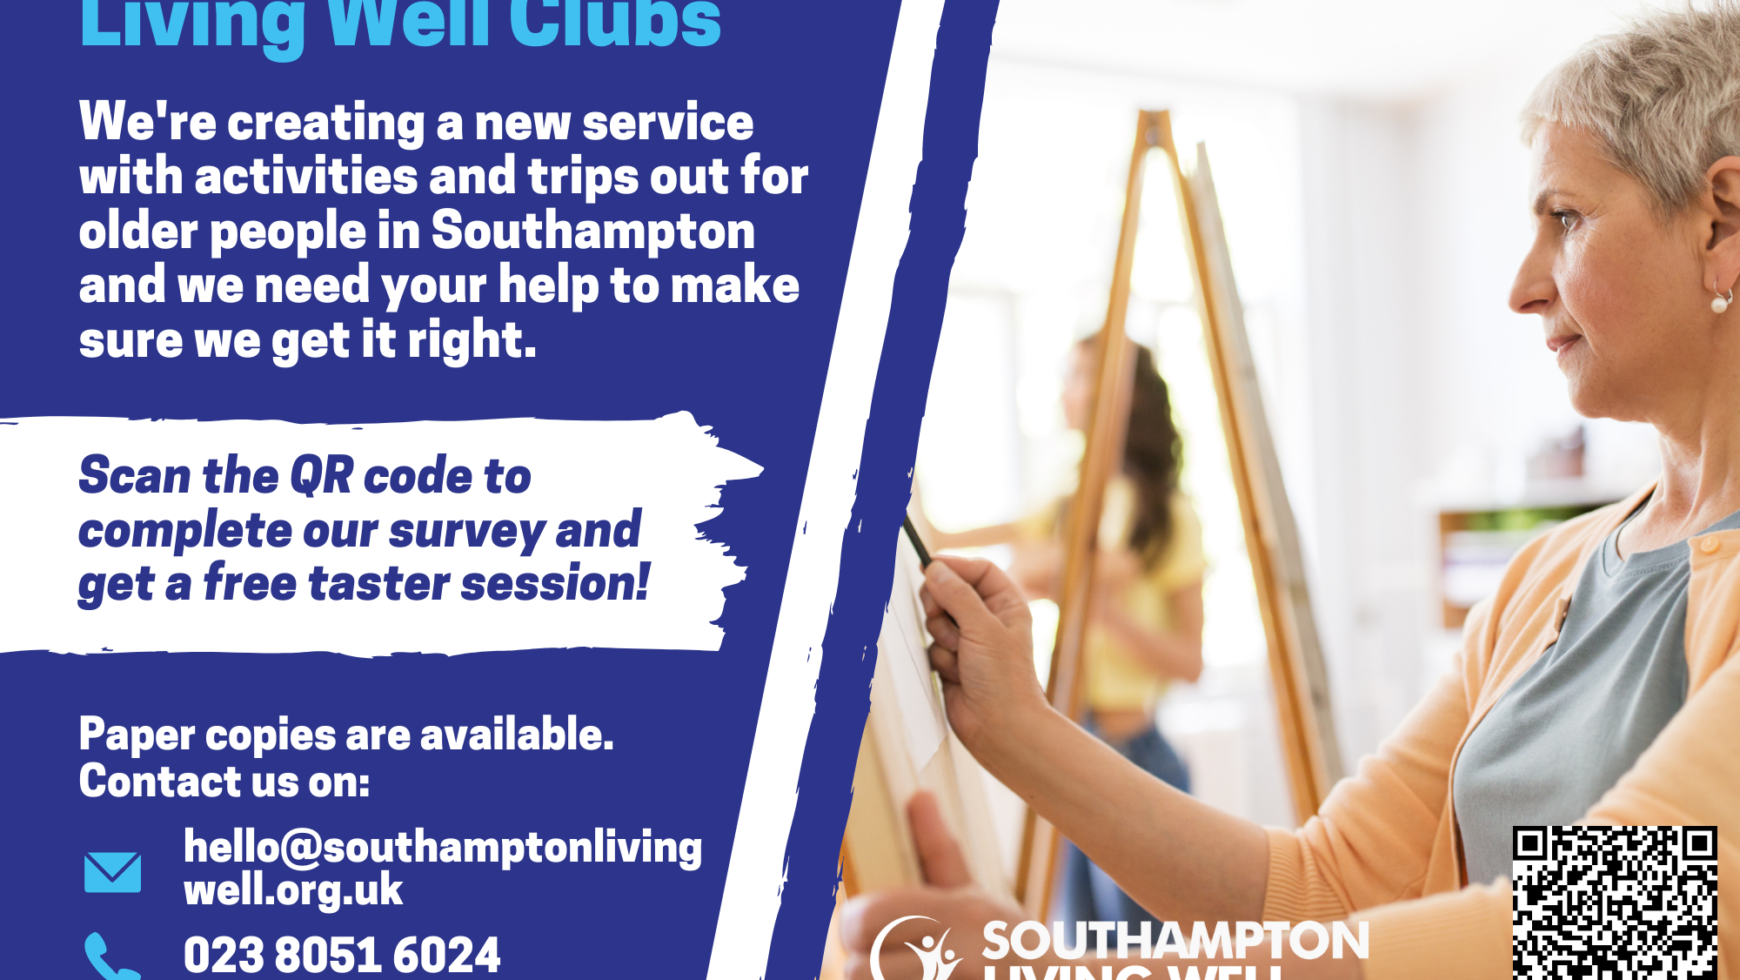 Help shape provision of services and activities for 60plus community in Southampton